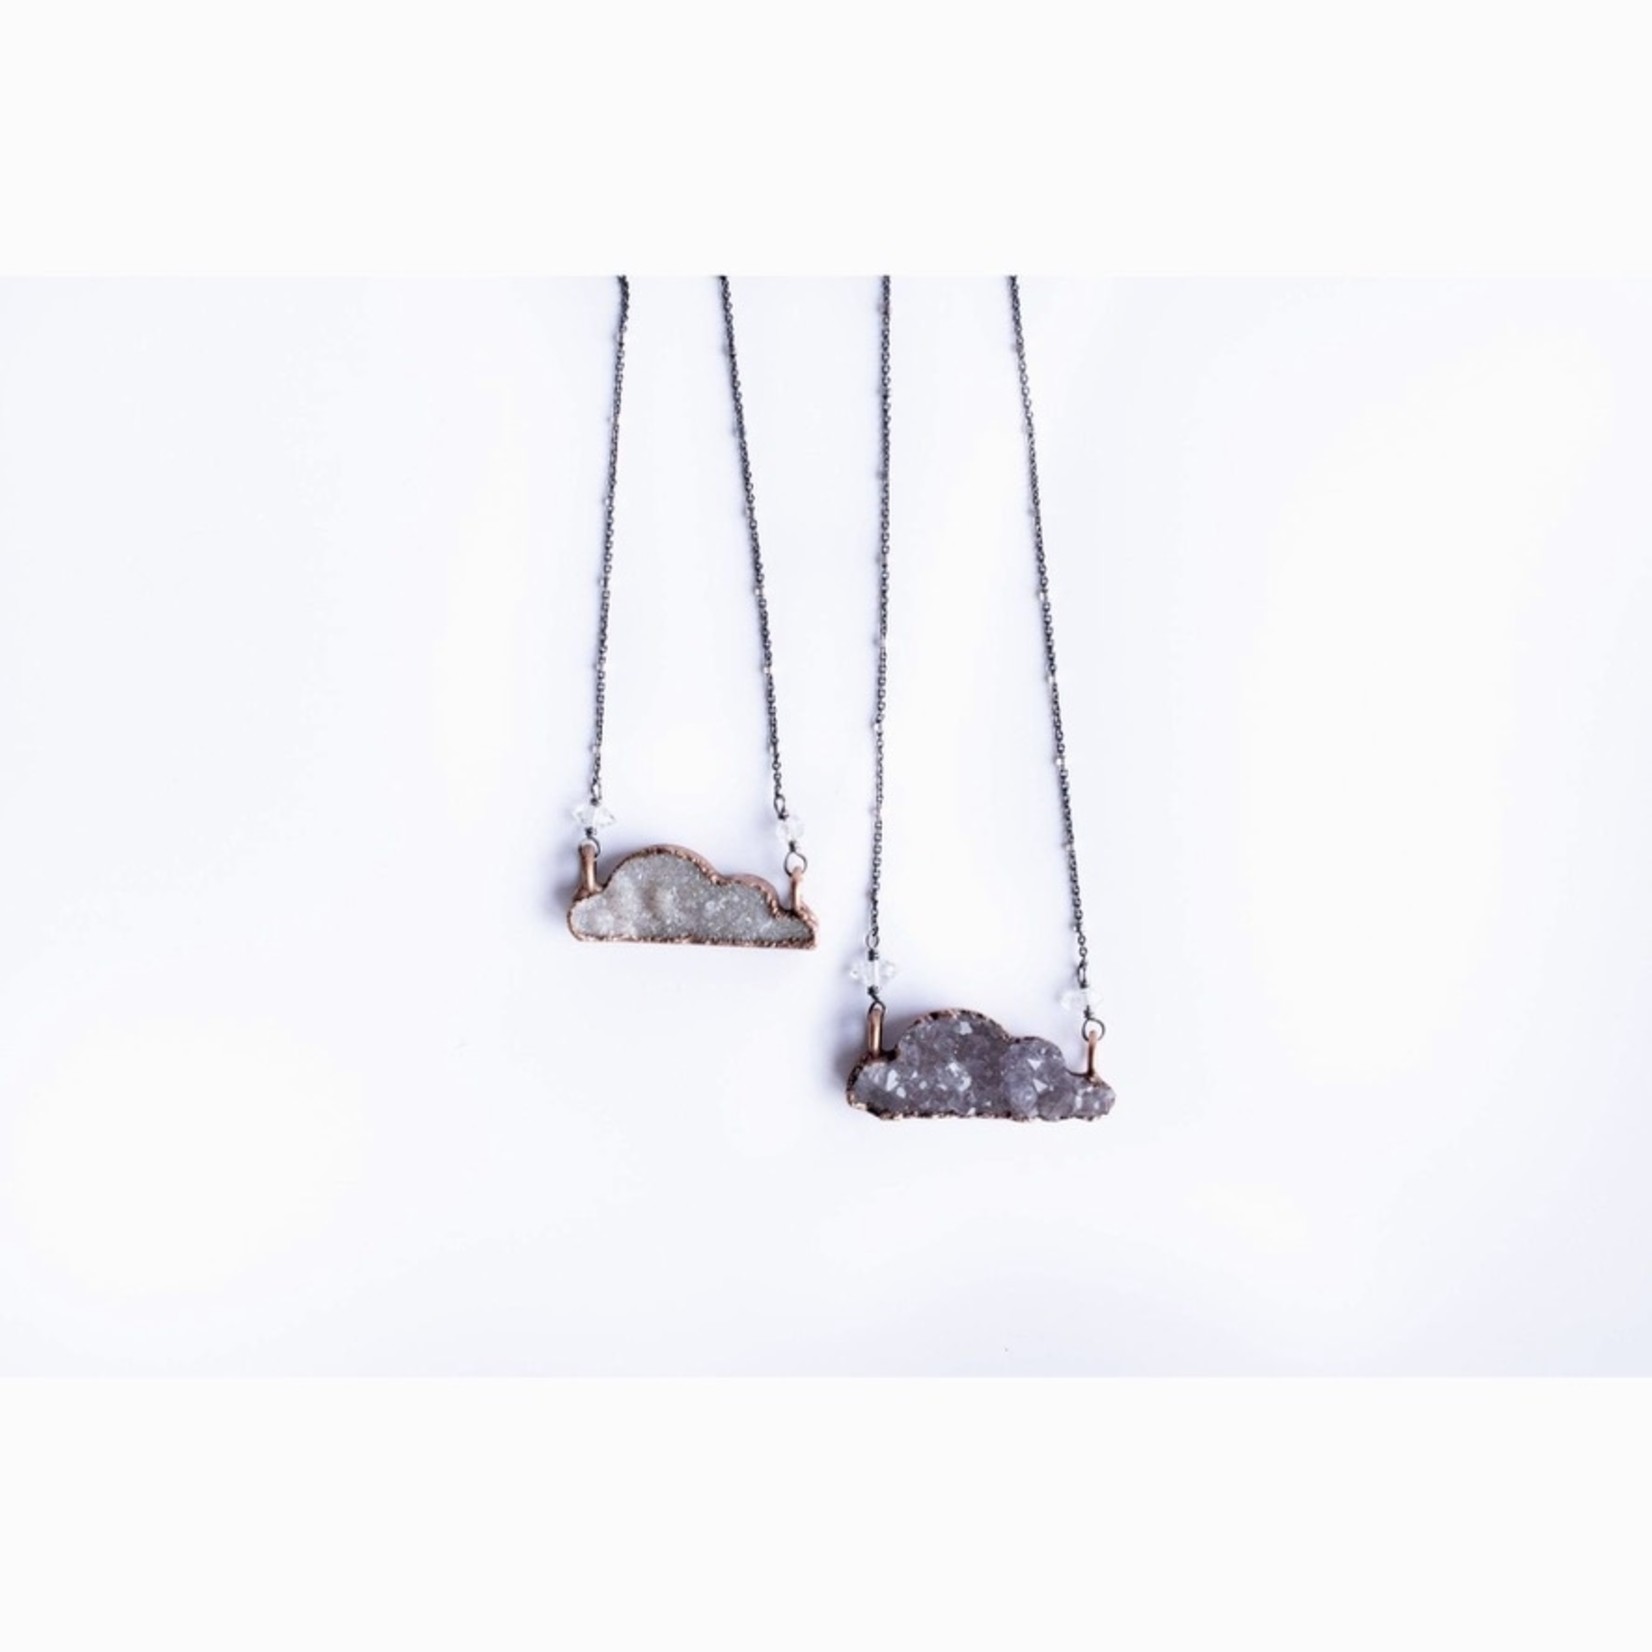 Druzy Cloud Necklace on 24" Silver Satellite Chain Necklace